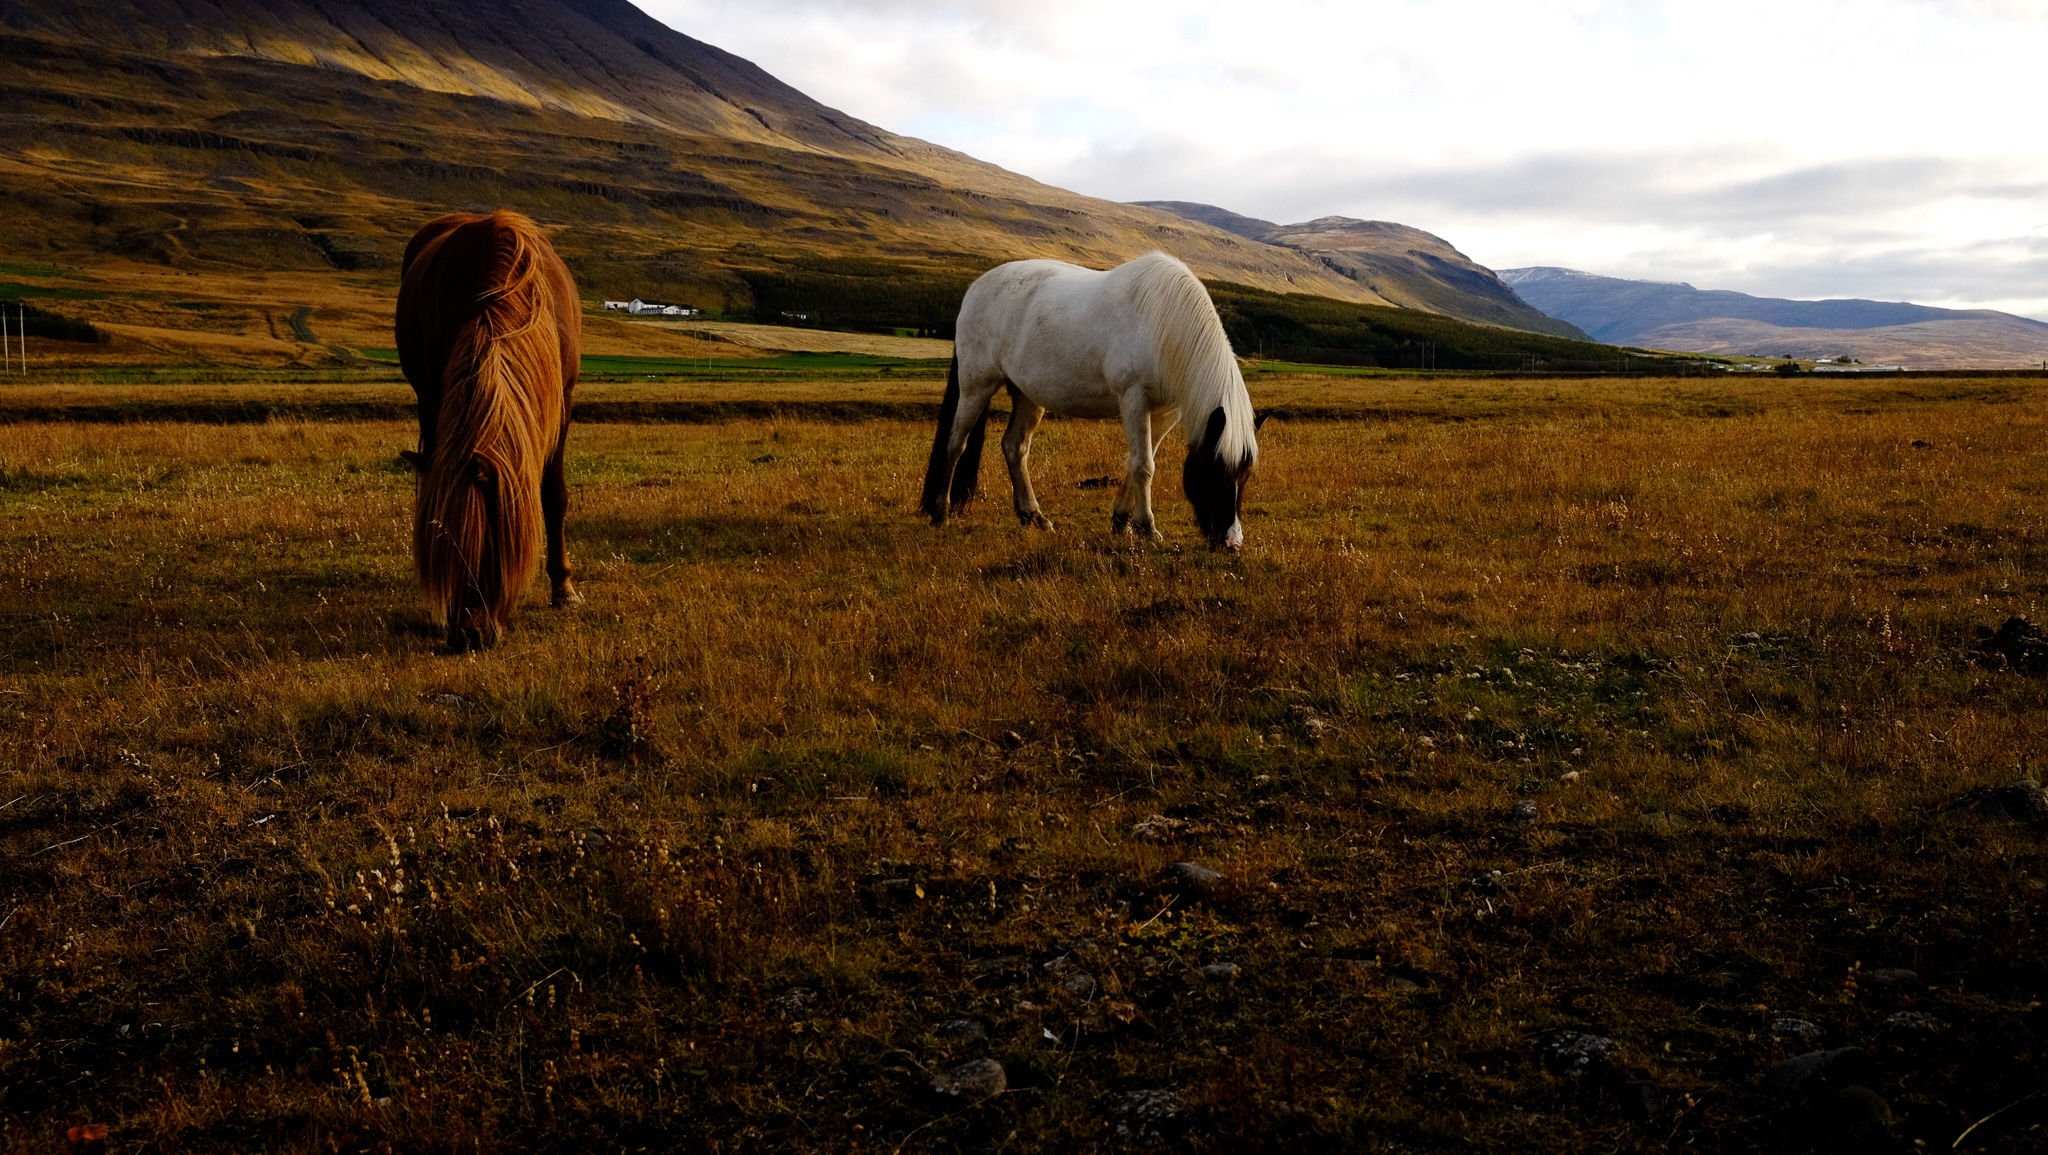 Two horses one orange brown, the other white with a pale brown head graze in a field with mountains in the background